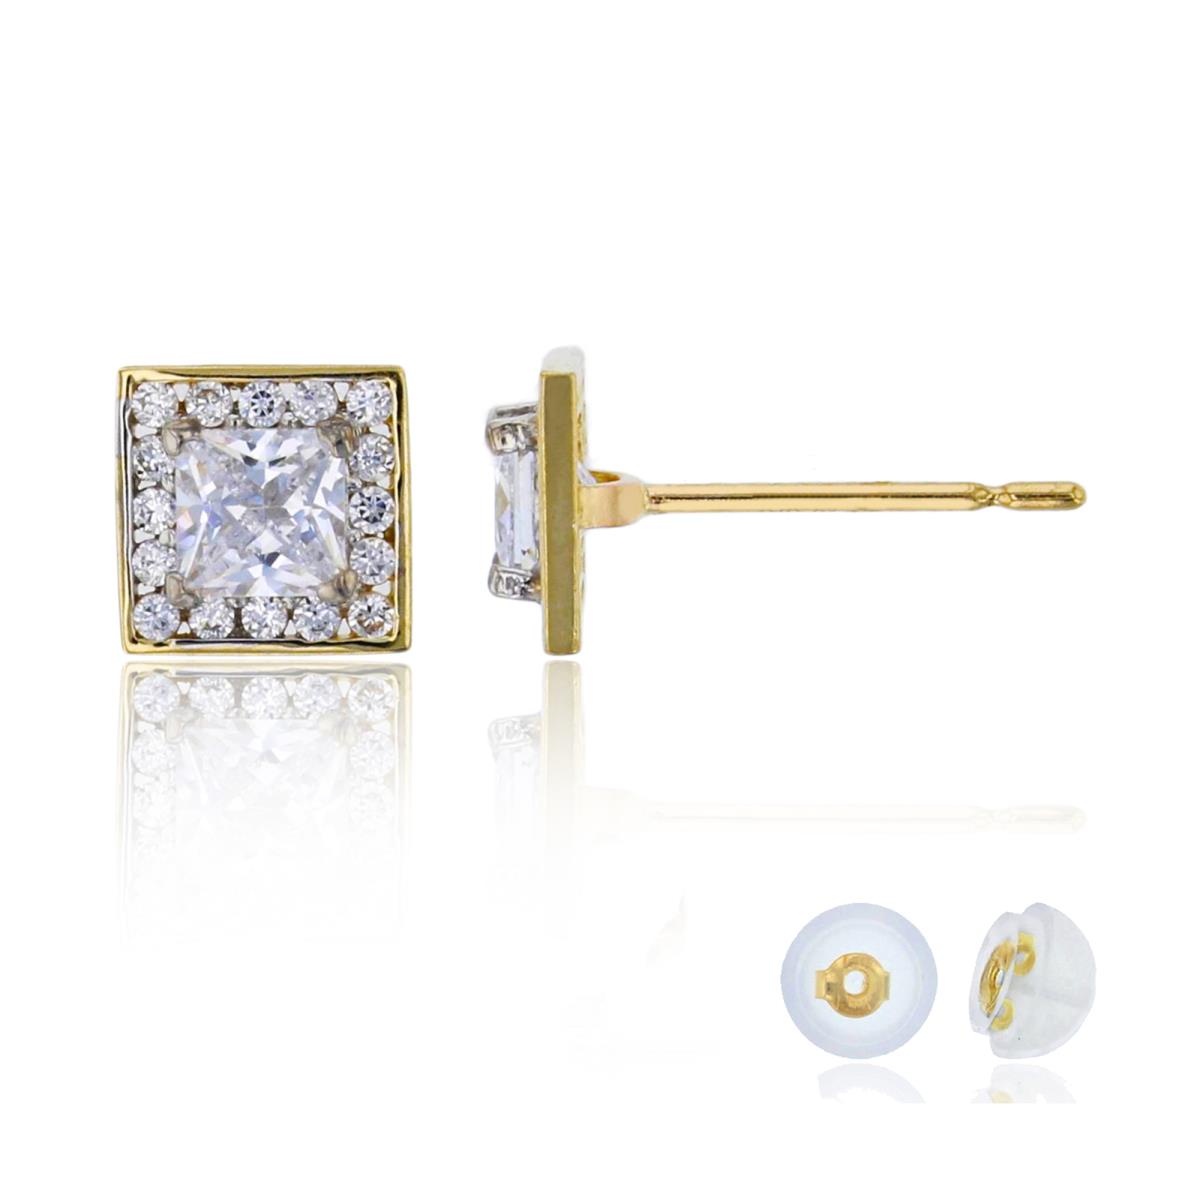 14K Two-Tone Gold 3.5mm Princess Cut Square Stud Earring with Silicone Back